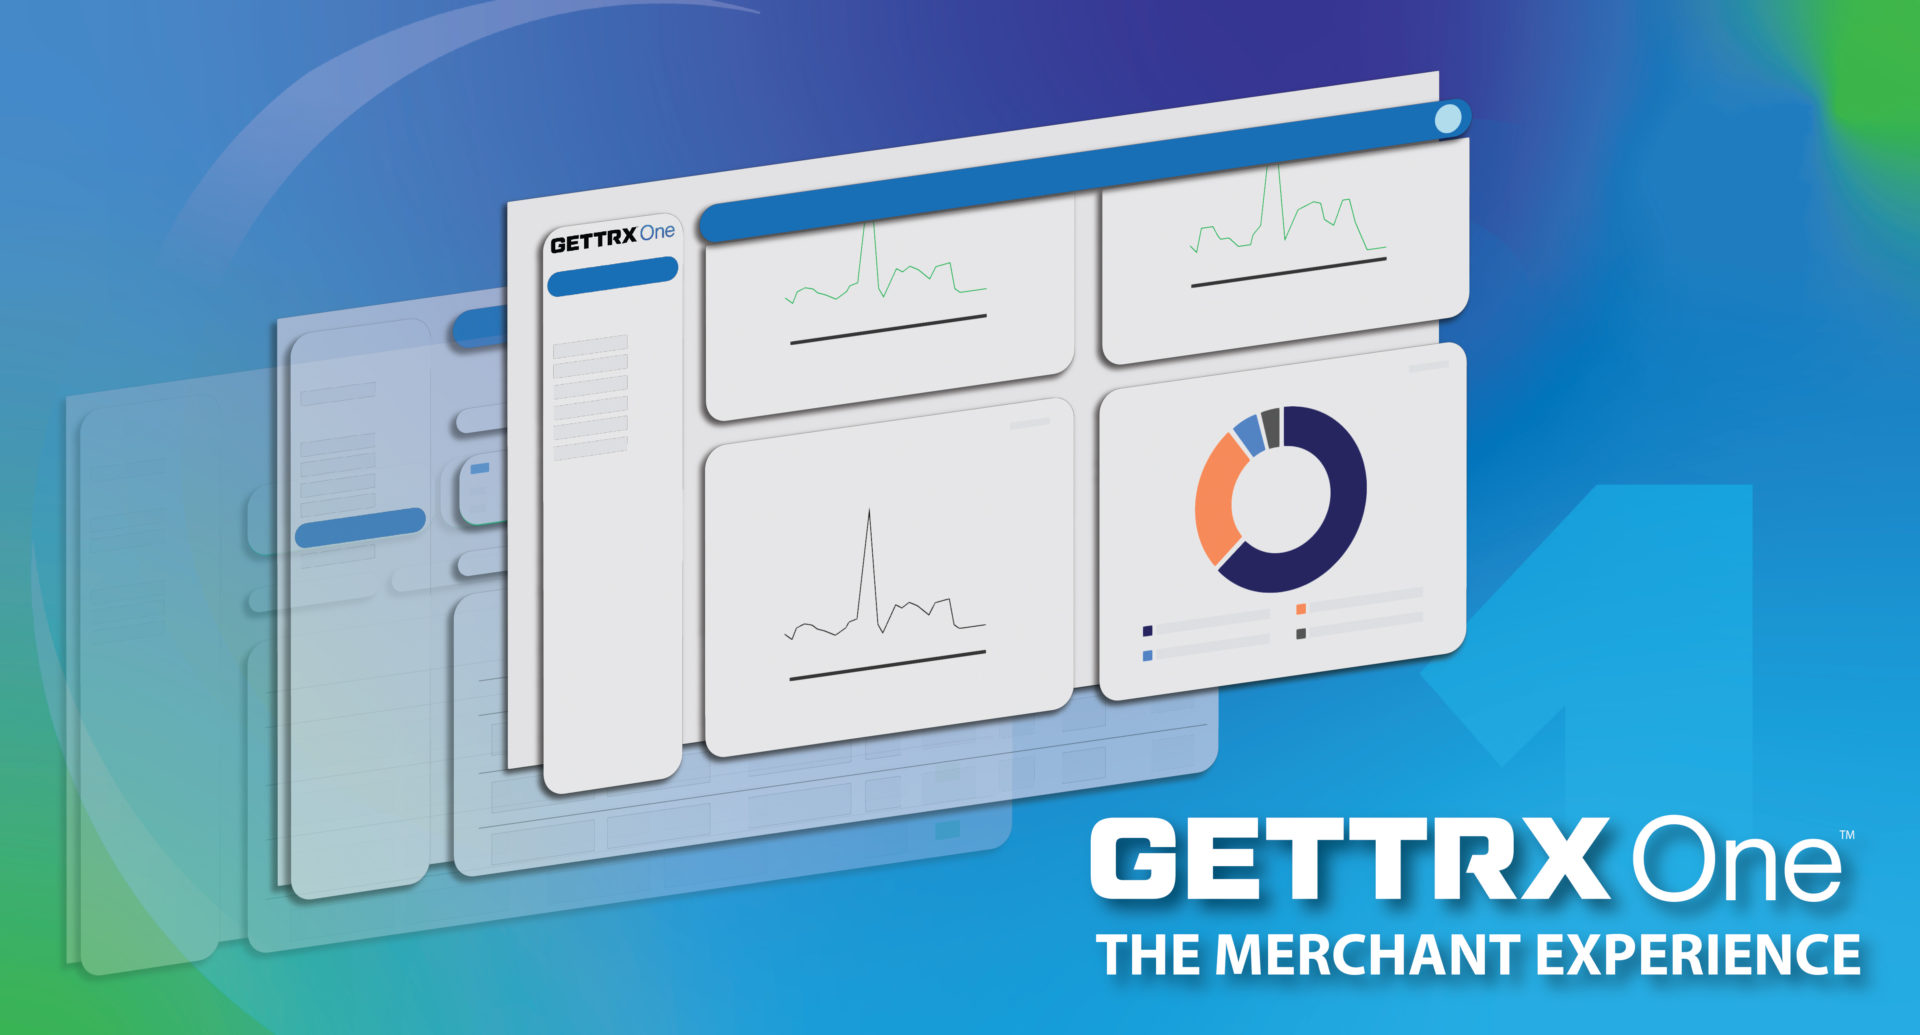 GETTRX One: The Merchant Experience